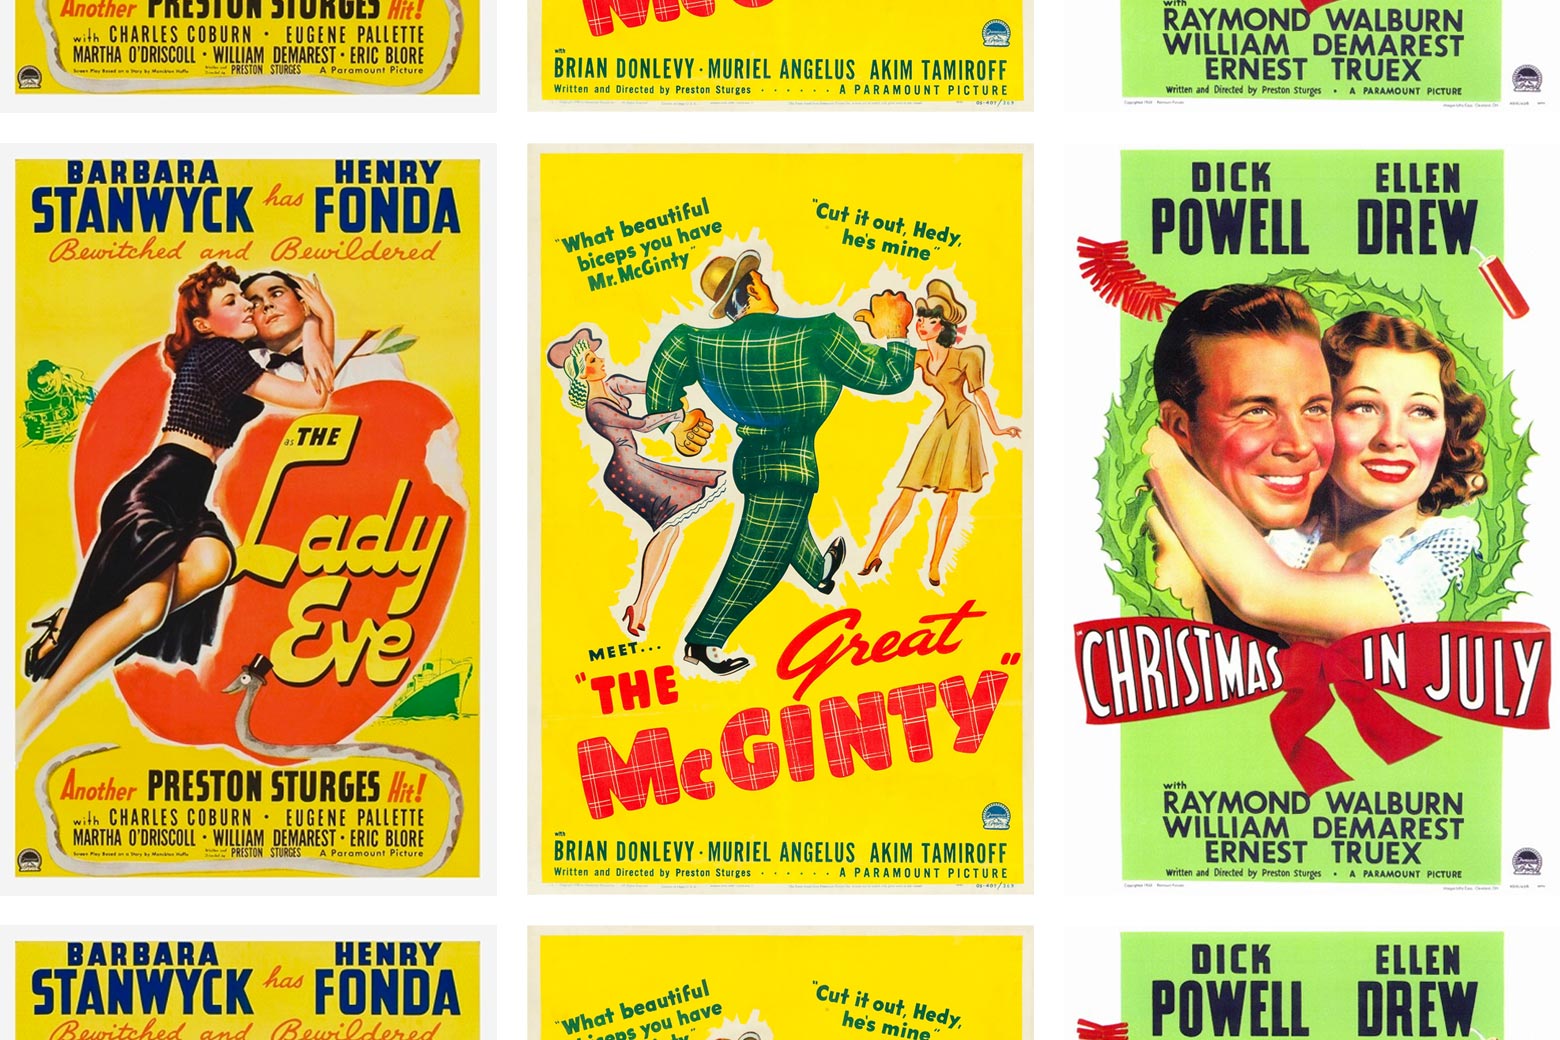 Vintage posters for The Lady Eve, The Great McGinty, and Christmas in July.